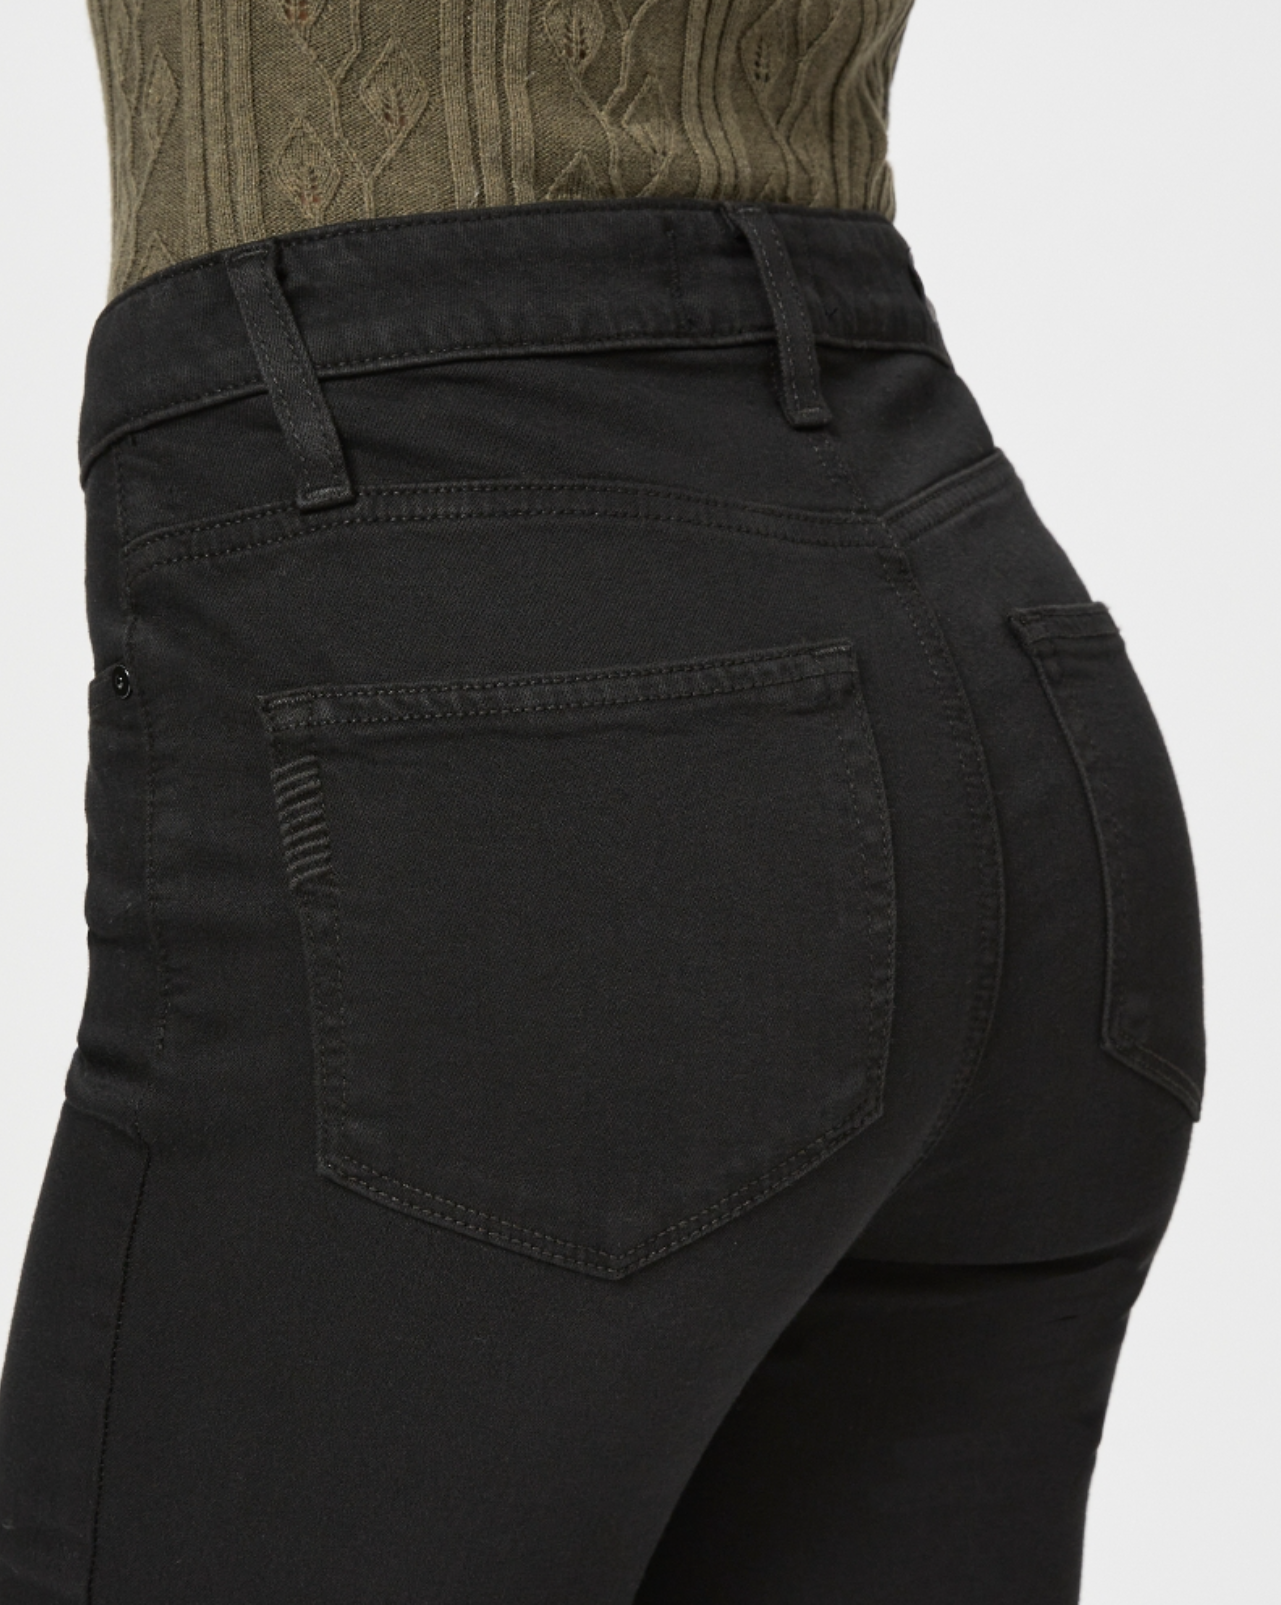 detail rear view of the cindy jean with raw hem from paige, in black, showing pocket detail